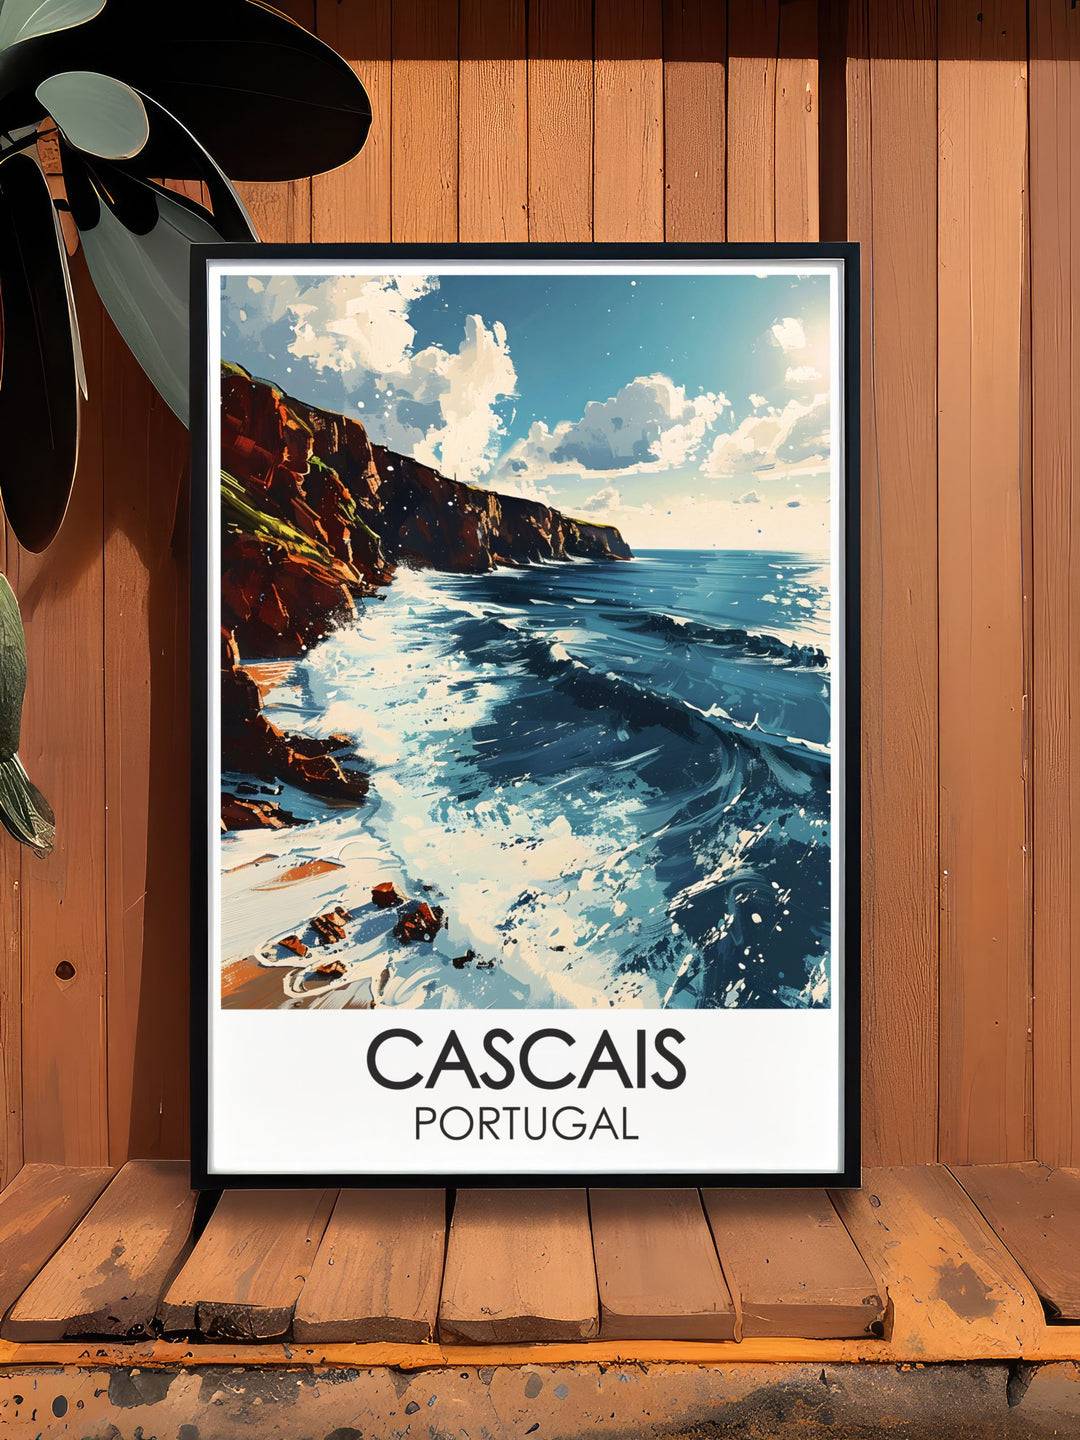 Experience the historic charm of Cascais with this print, featuring cobblestone streets and quaint buildings that reflect the towns rich cultural heritage.